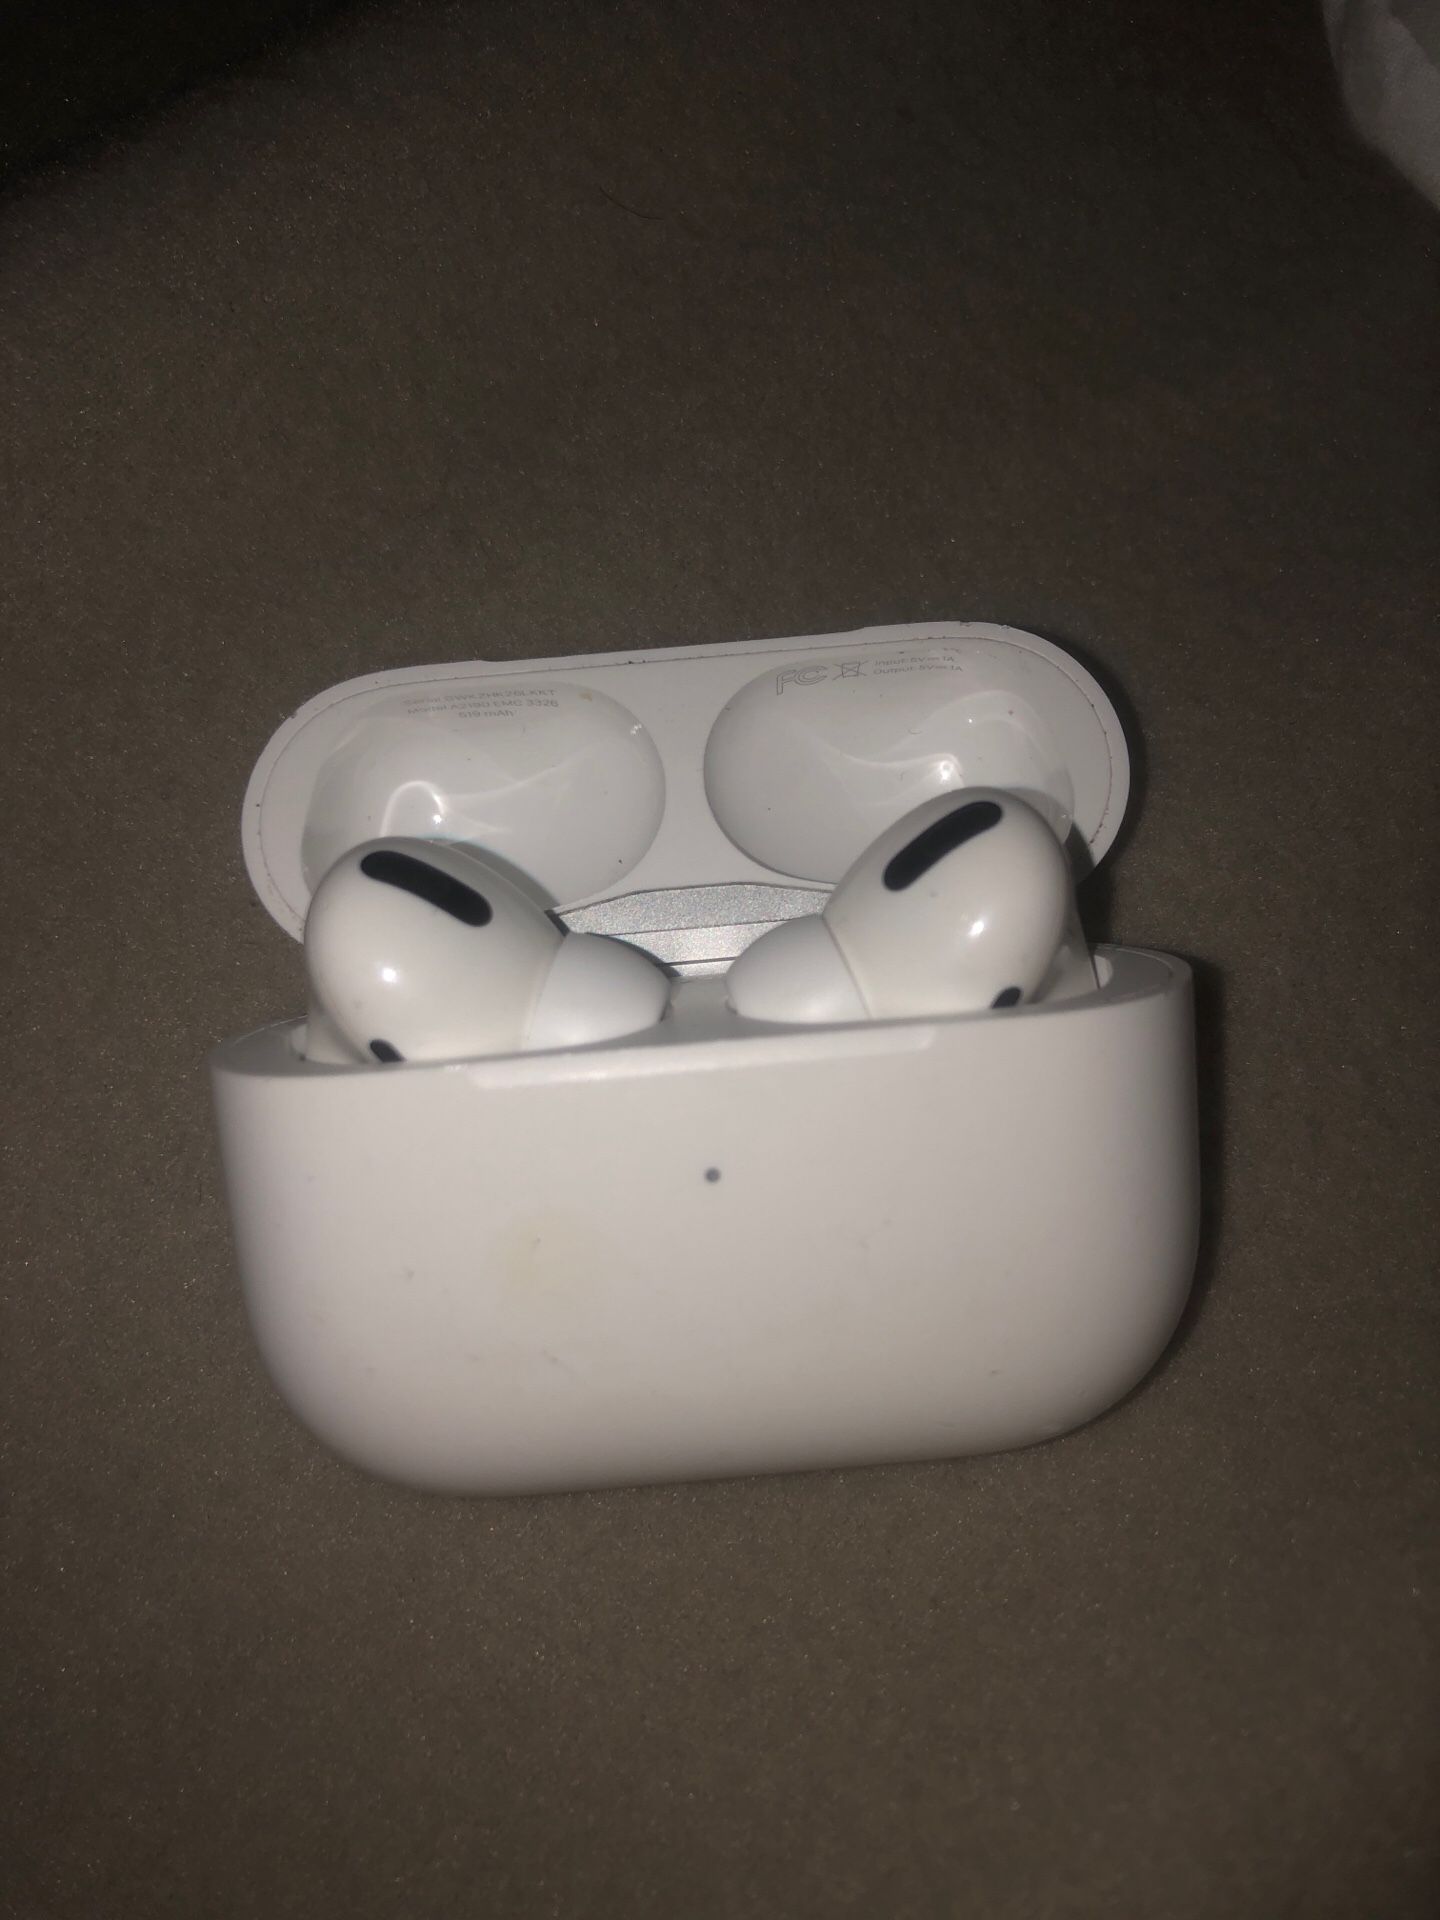 APPLE AIRPODS (USED A FEW TIMES)